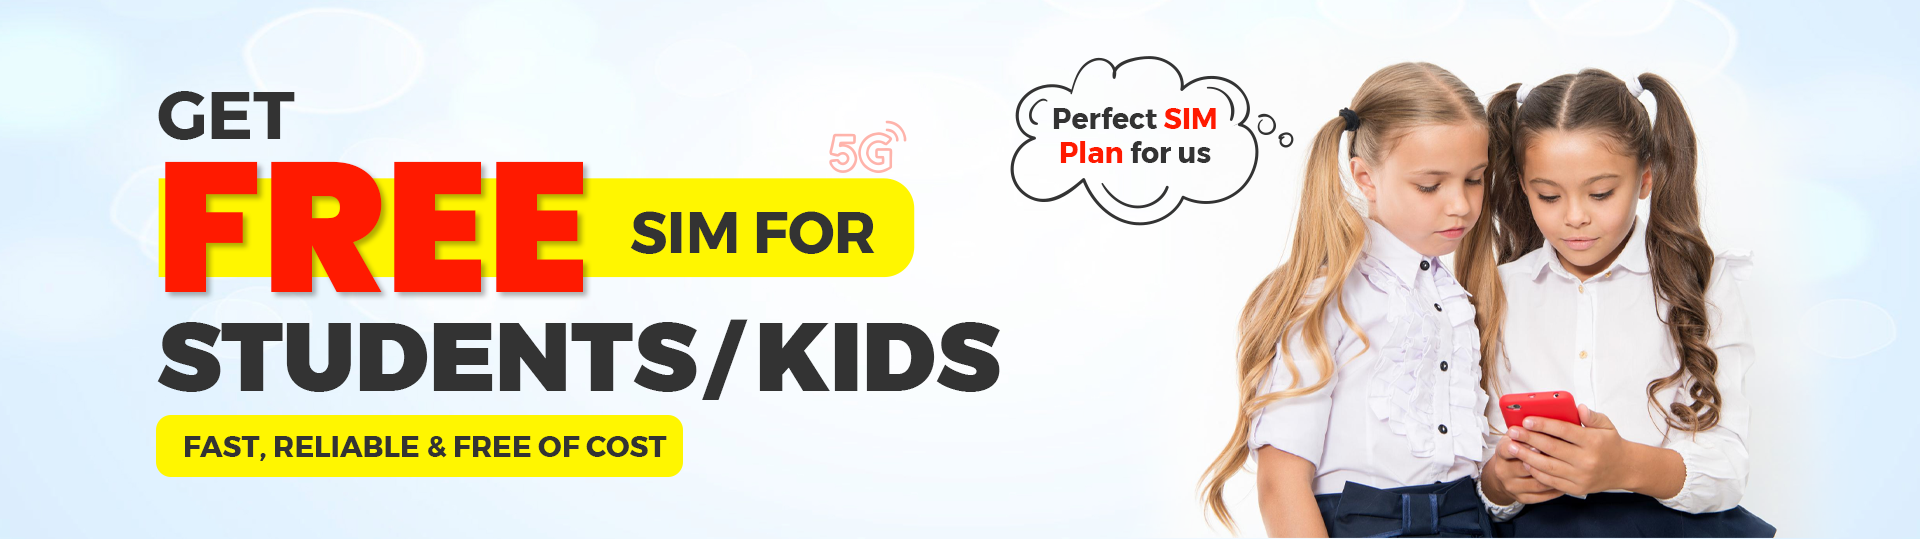 Free SIM for Students Kids